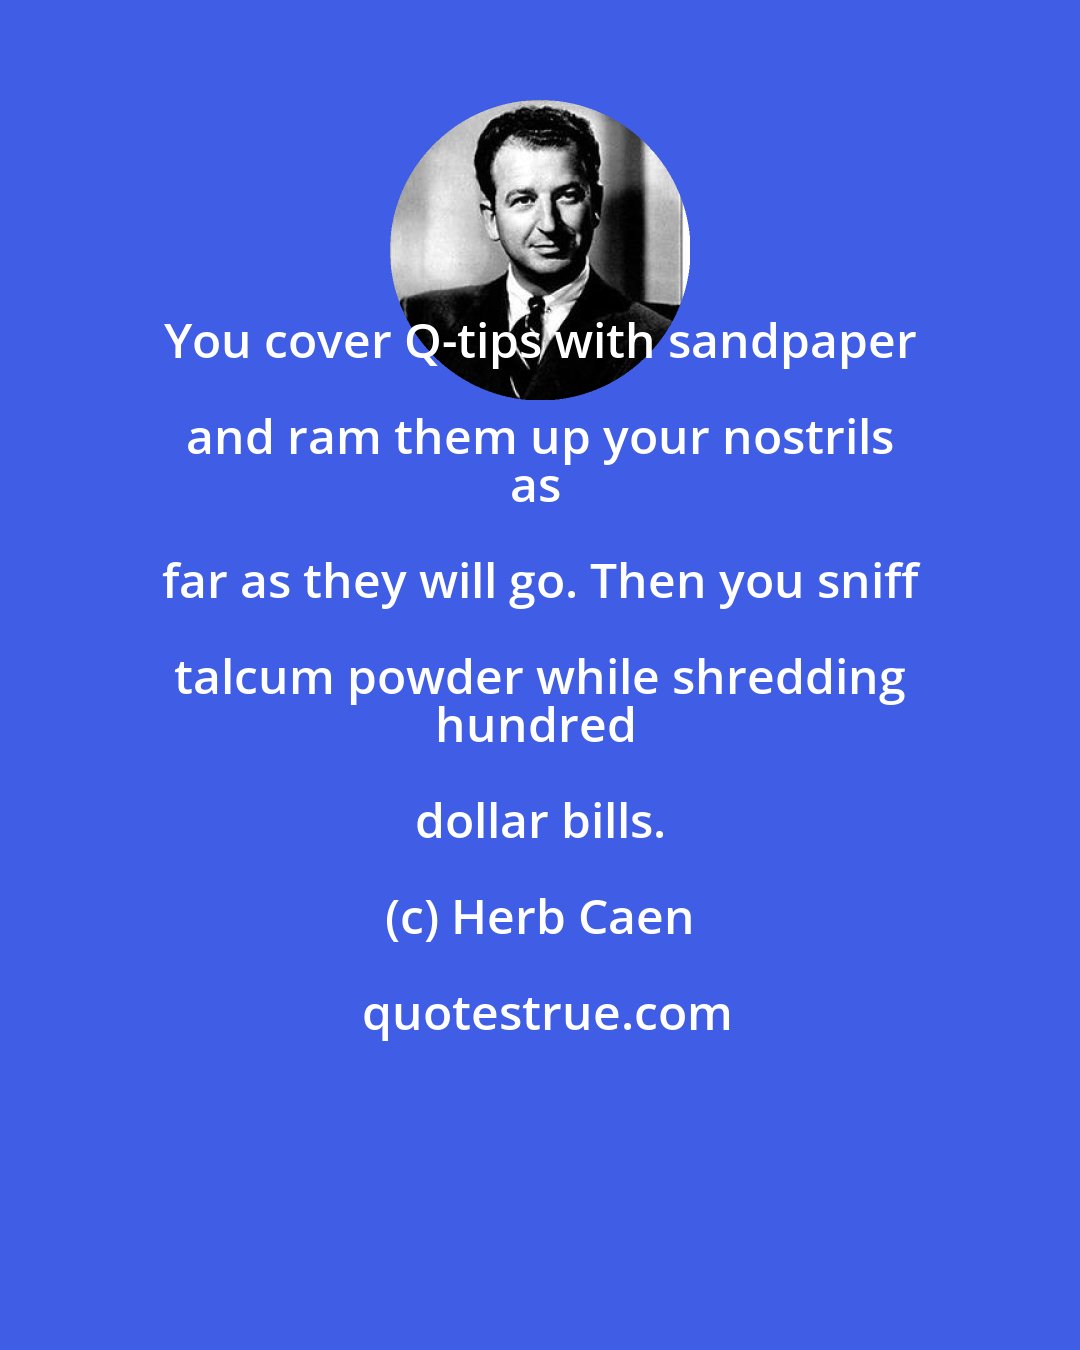 Herb Caen: You cover Q-tips with sandpaper and ram them up your nostrils 
as far as they will go. Then you sniff talcum powder while shredding 
hundred dollar bills.